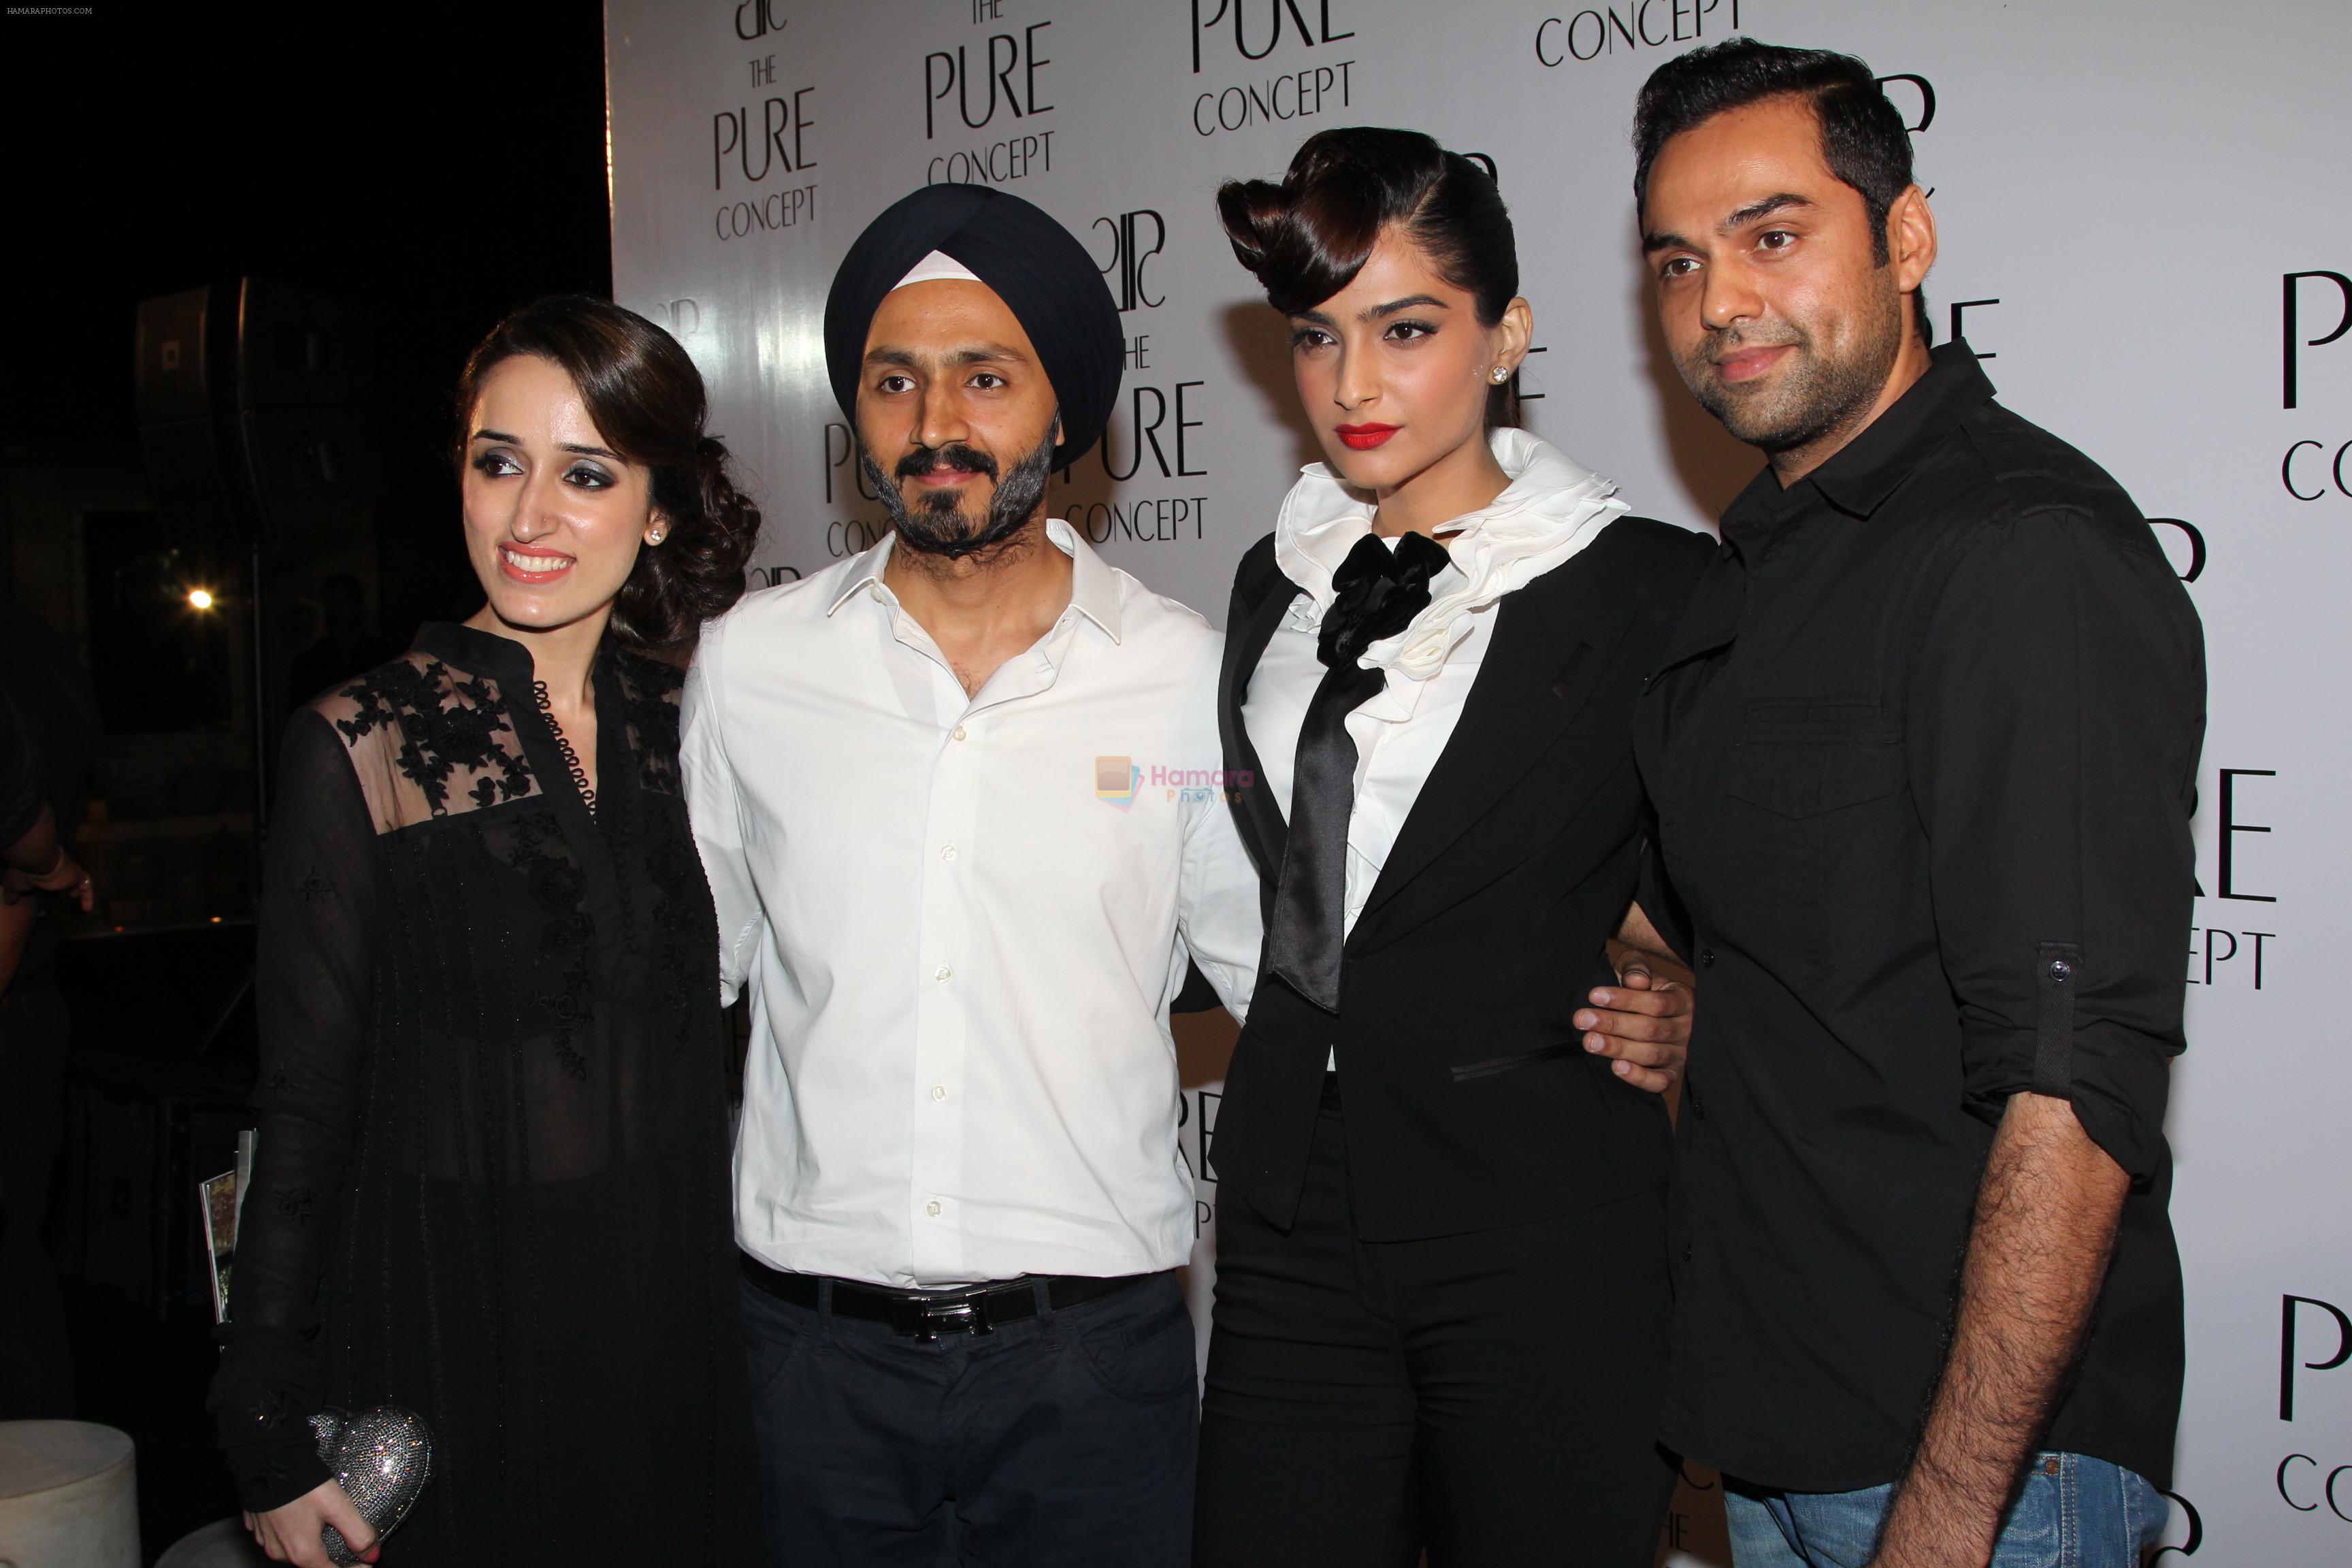 The Pure Concept- Creative designer Chanya Kaur & Founder Dalbi Singh with Sonam Kapoor and Abhay Deol at the launch of Pure Concept in Mumbai on 29th June 2012